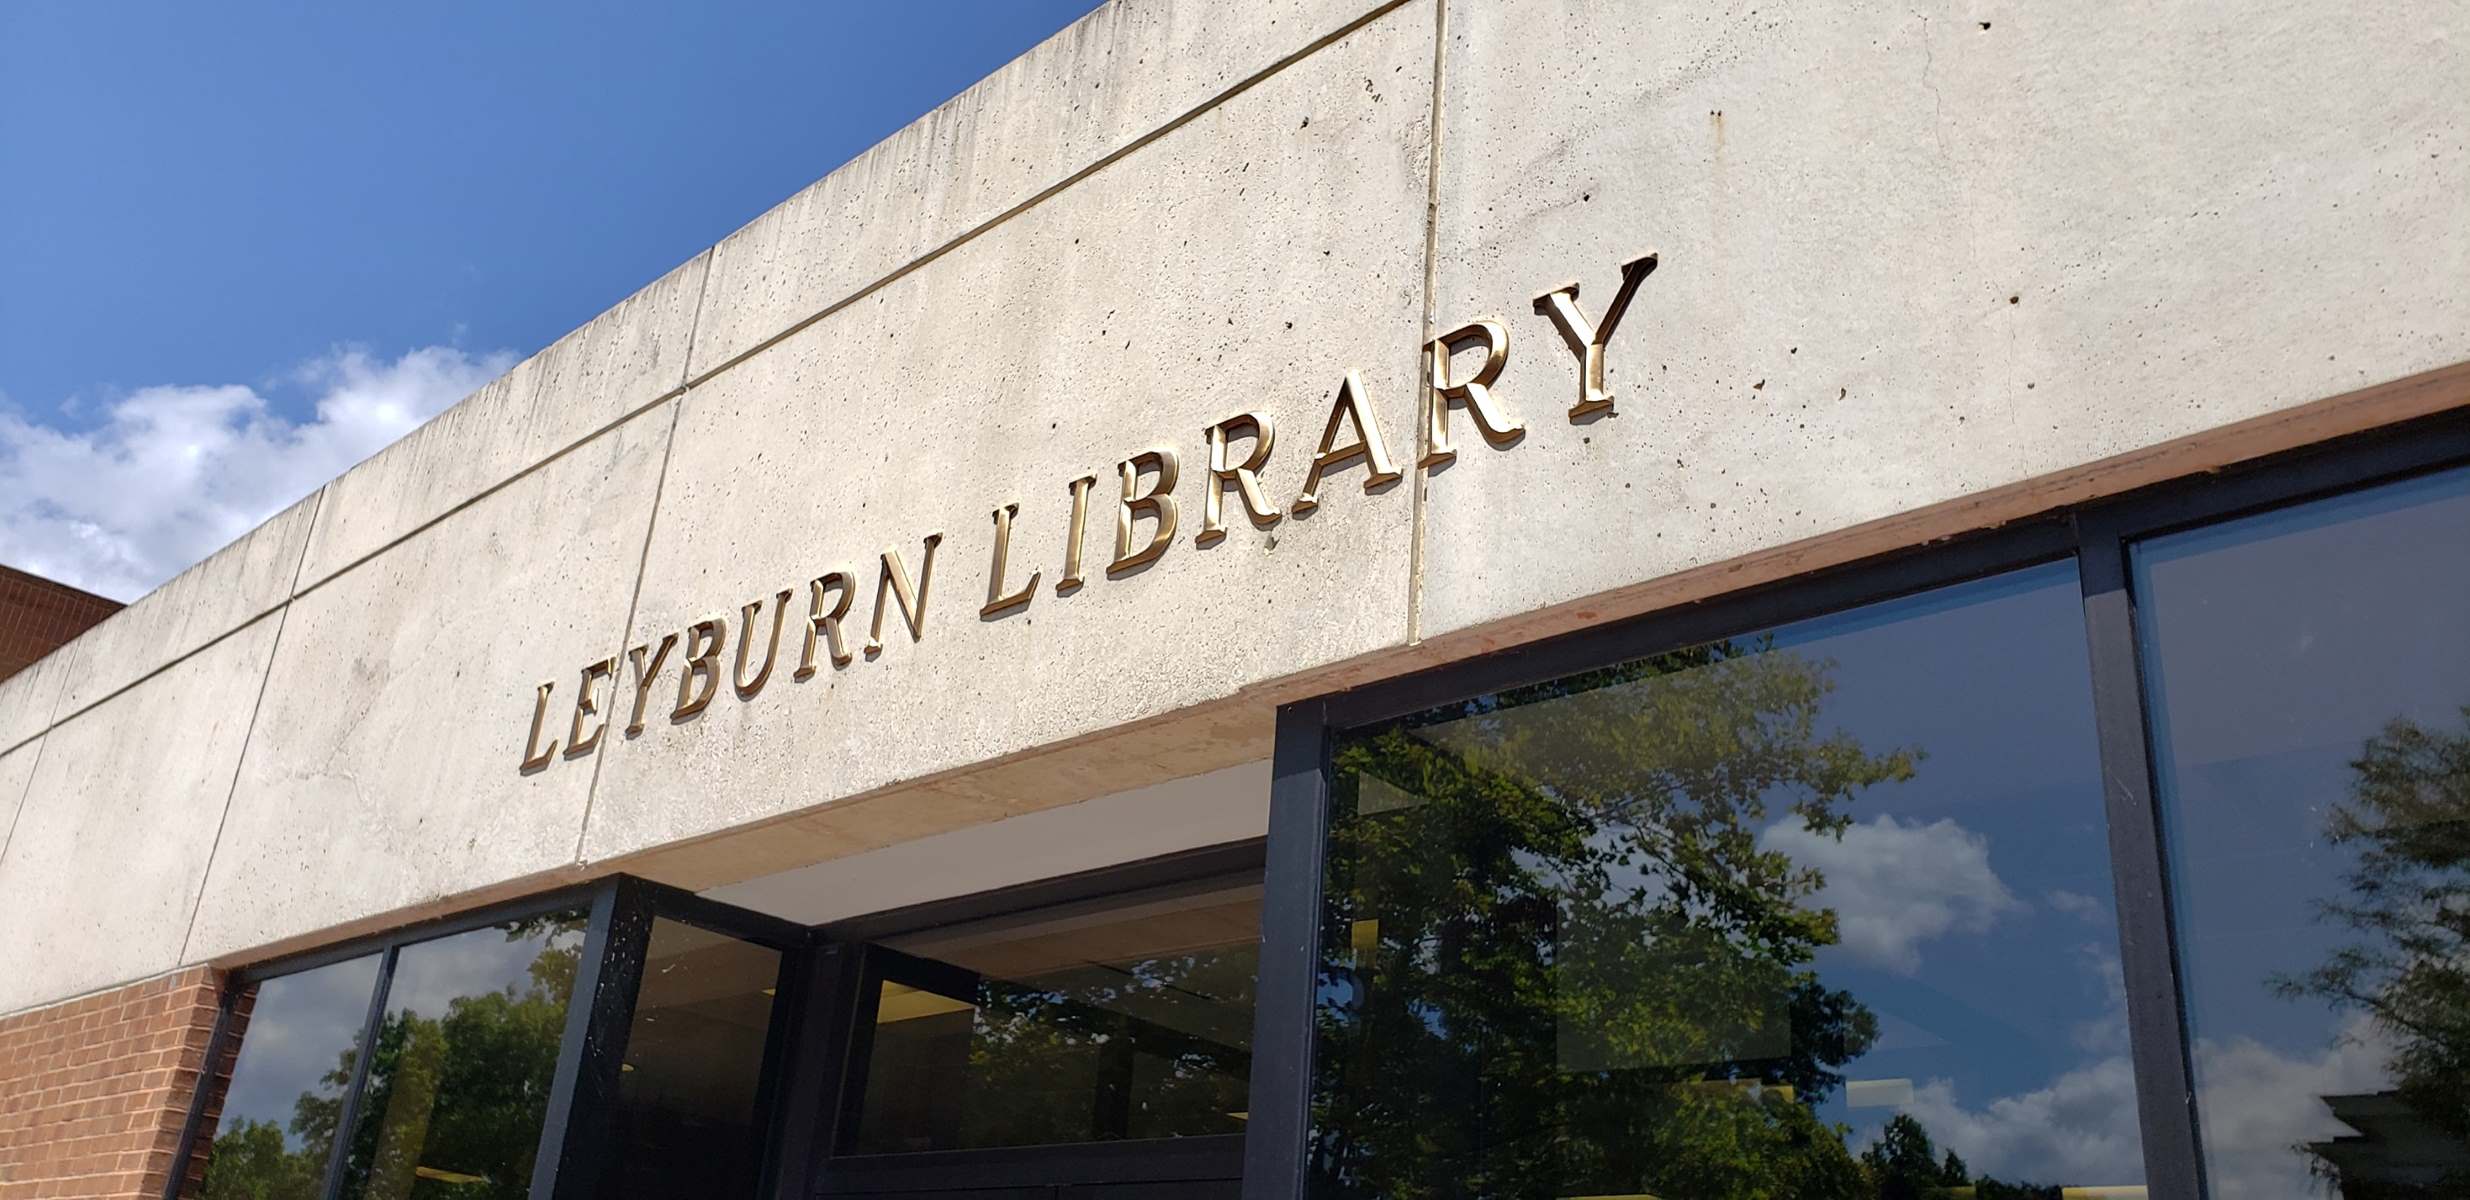 19-fascinating-facts-about-leyburn-library